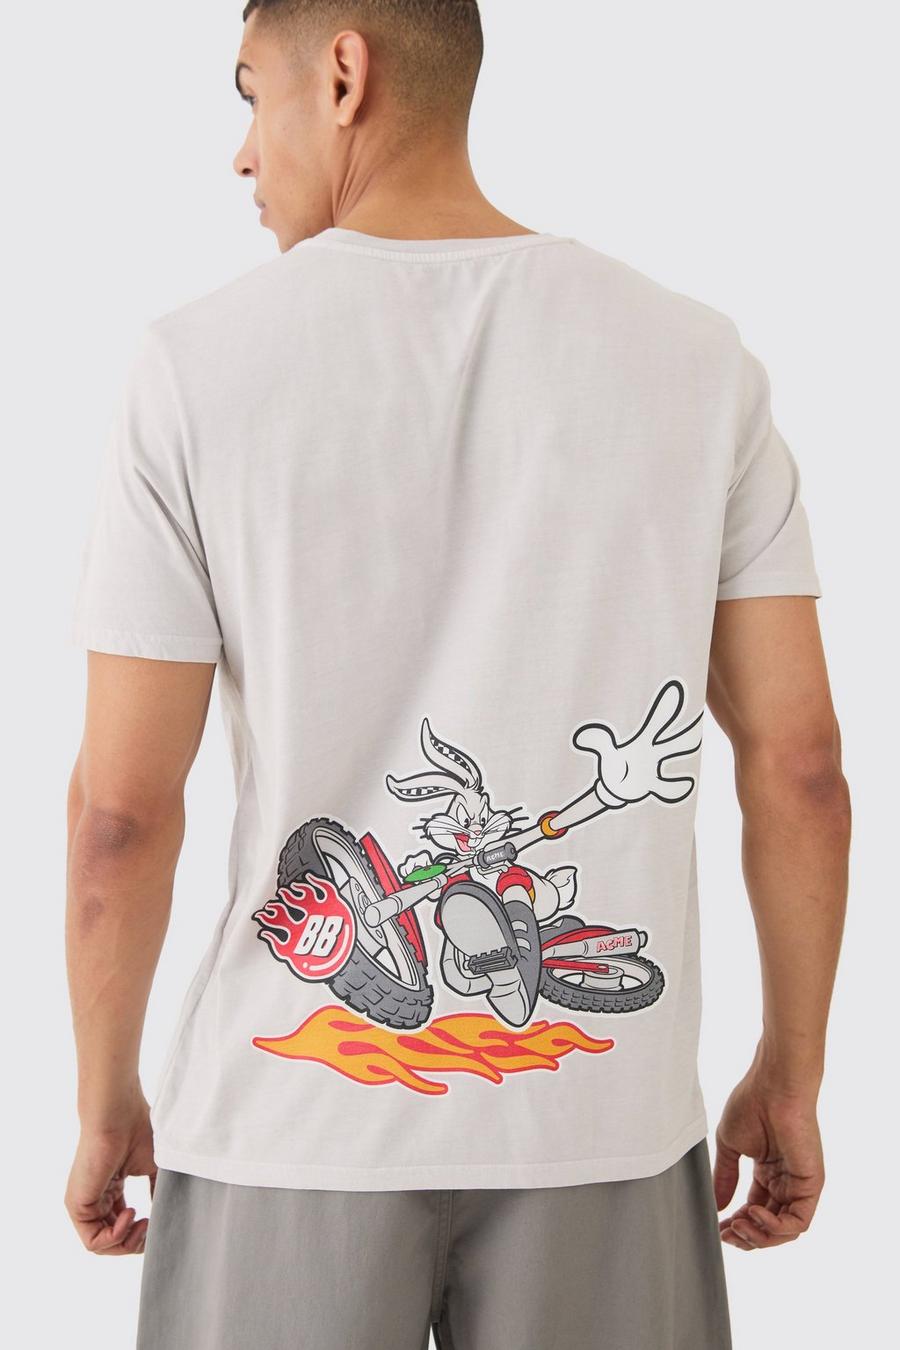 Stone Loose Looney Tunes Bugs Bunny Wash License T-shirt